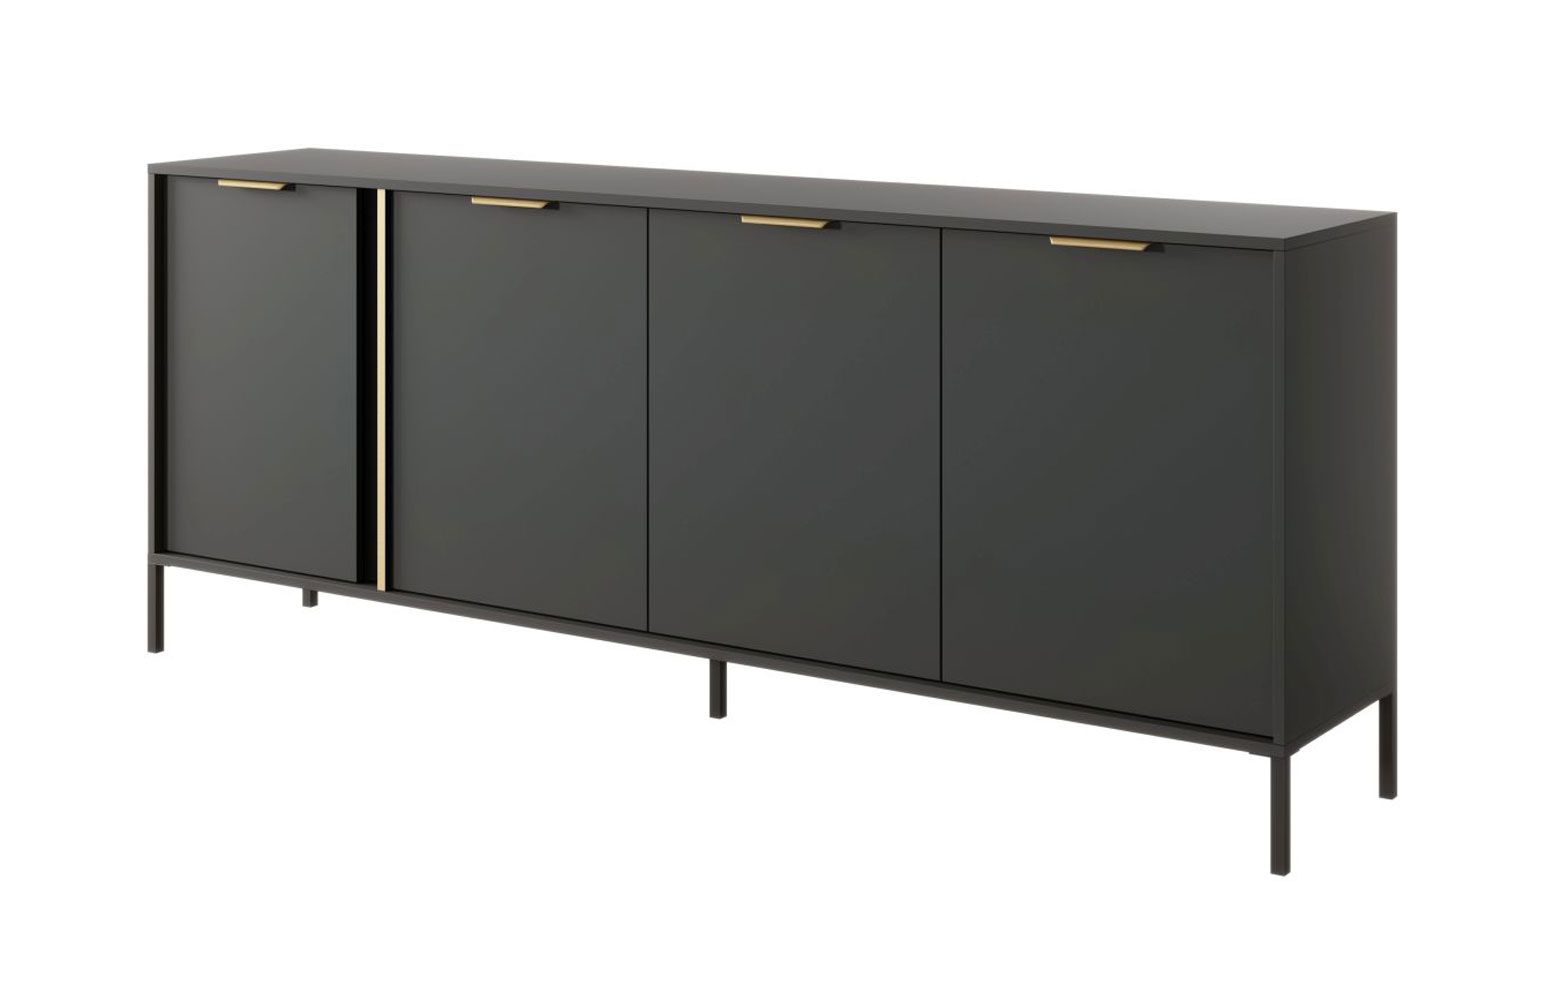 Long sideboard with ample storage space Raoued 05, color: anthracite - Dimensions: 81 x 203 x 39.5 cm (H x W x D)